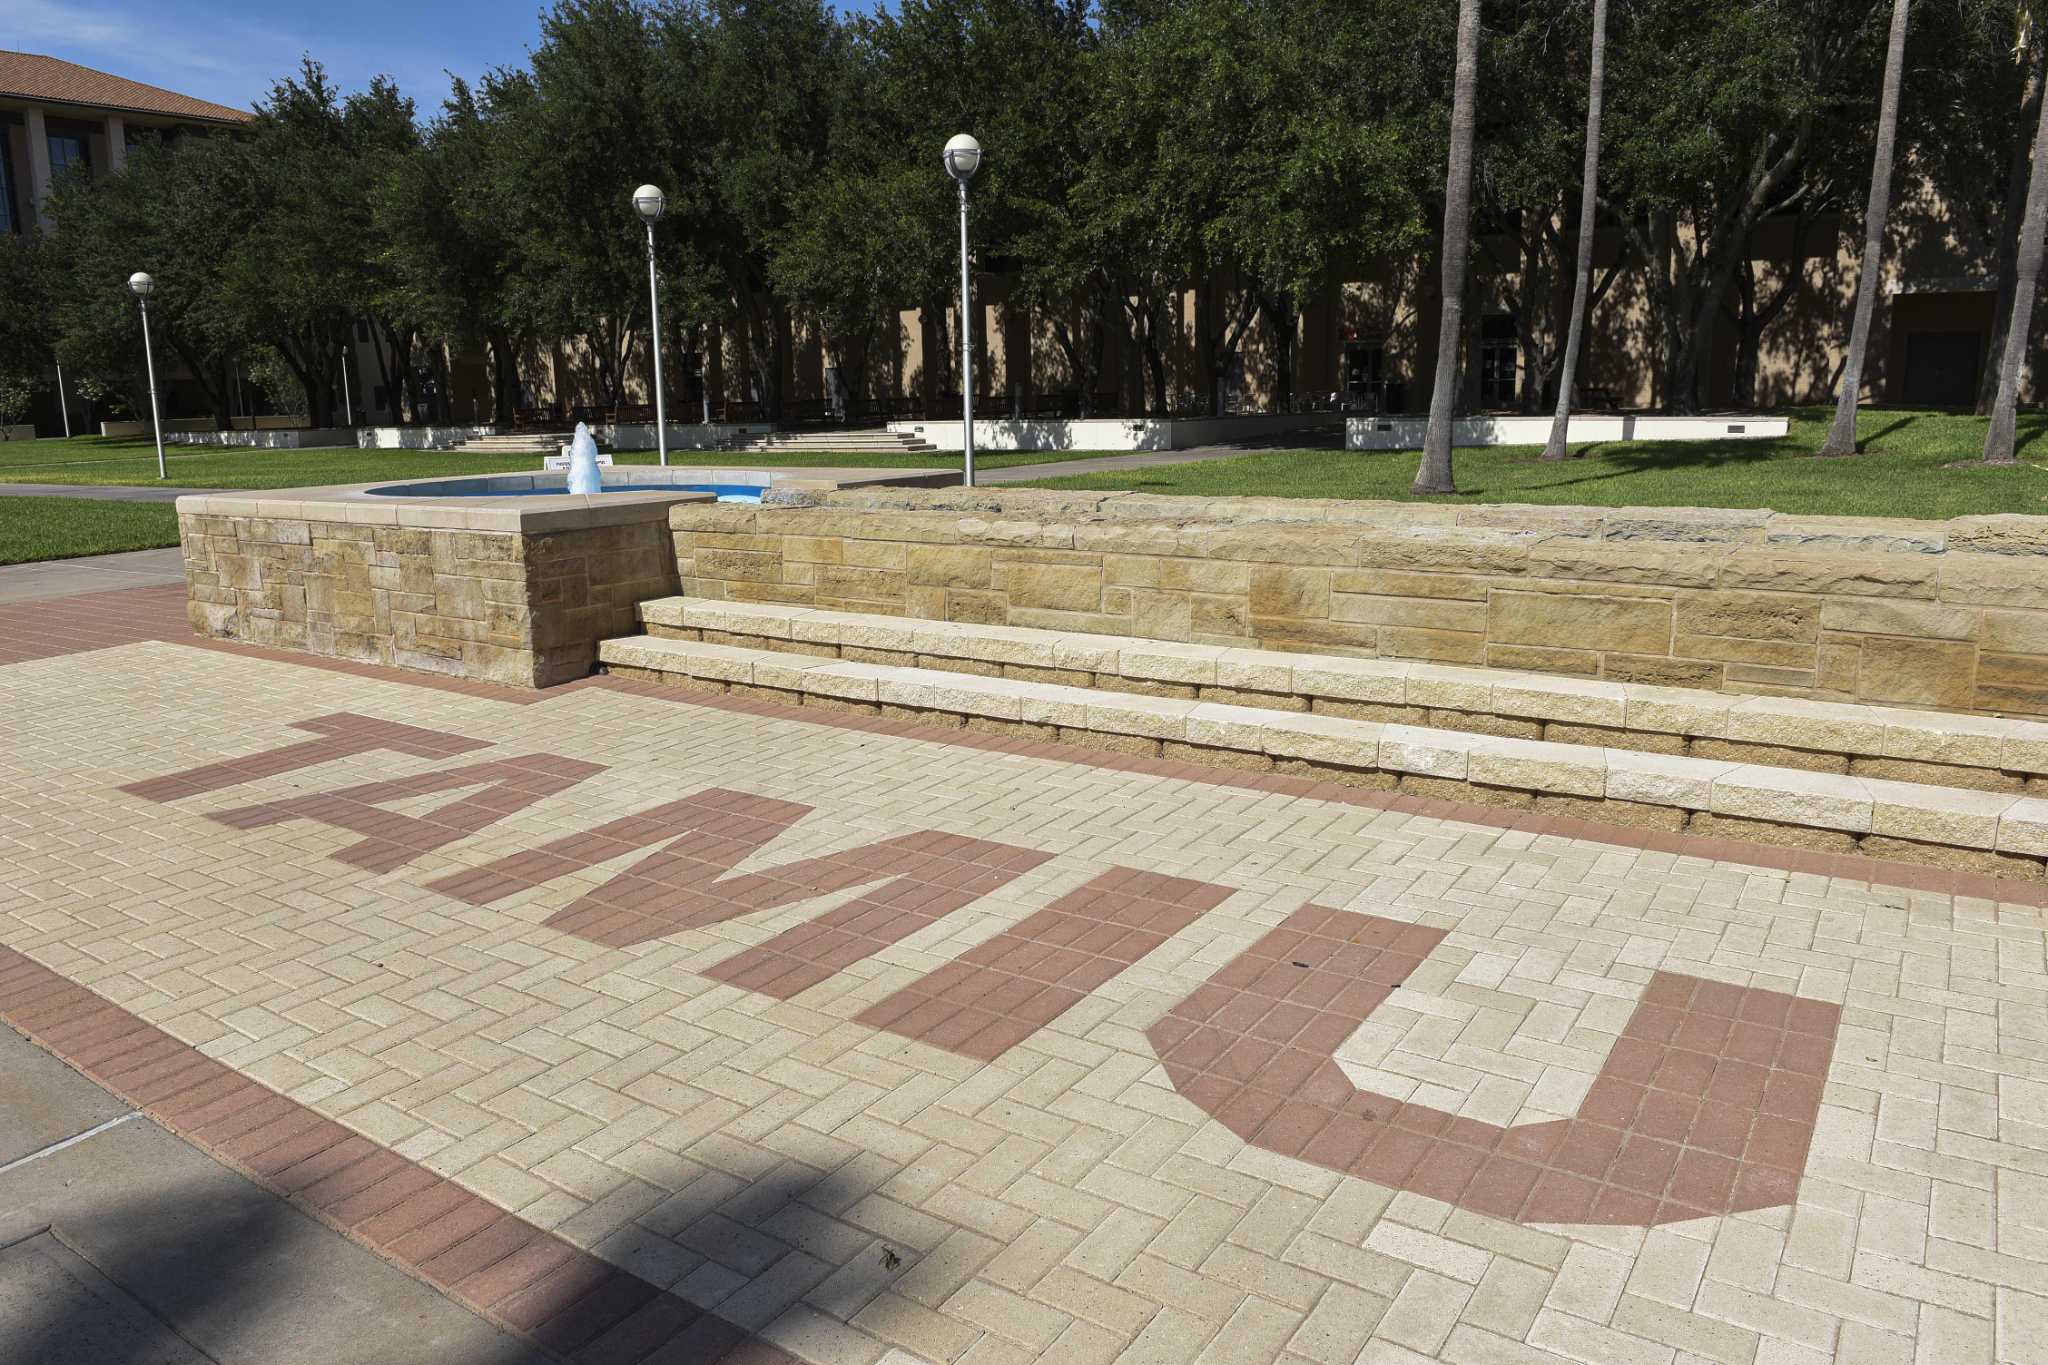 TAMIU offices reopen tuesday; registration for spring 2022 underway